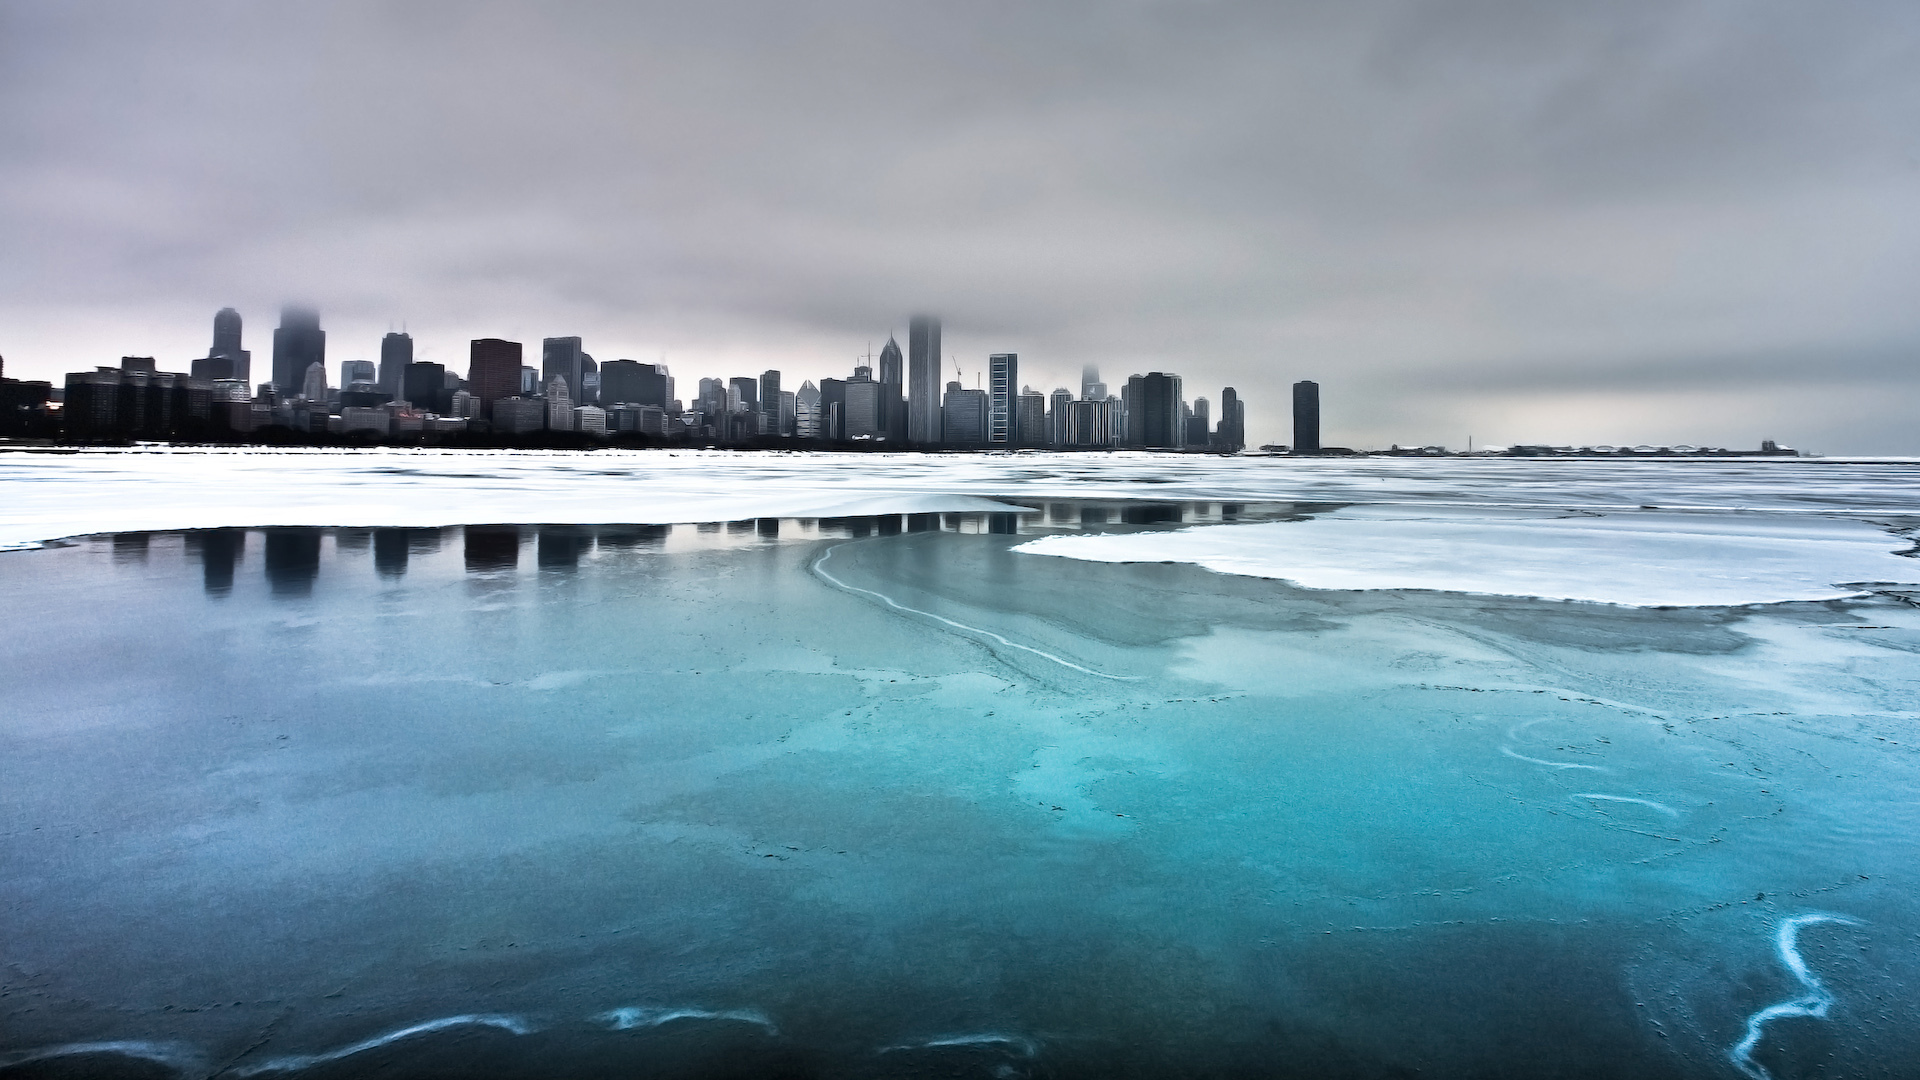 blue, man made, chicago, city, cloud, cold, frozen, ice, landscape, river, snow, winter, cities